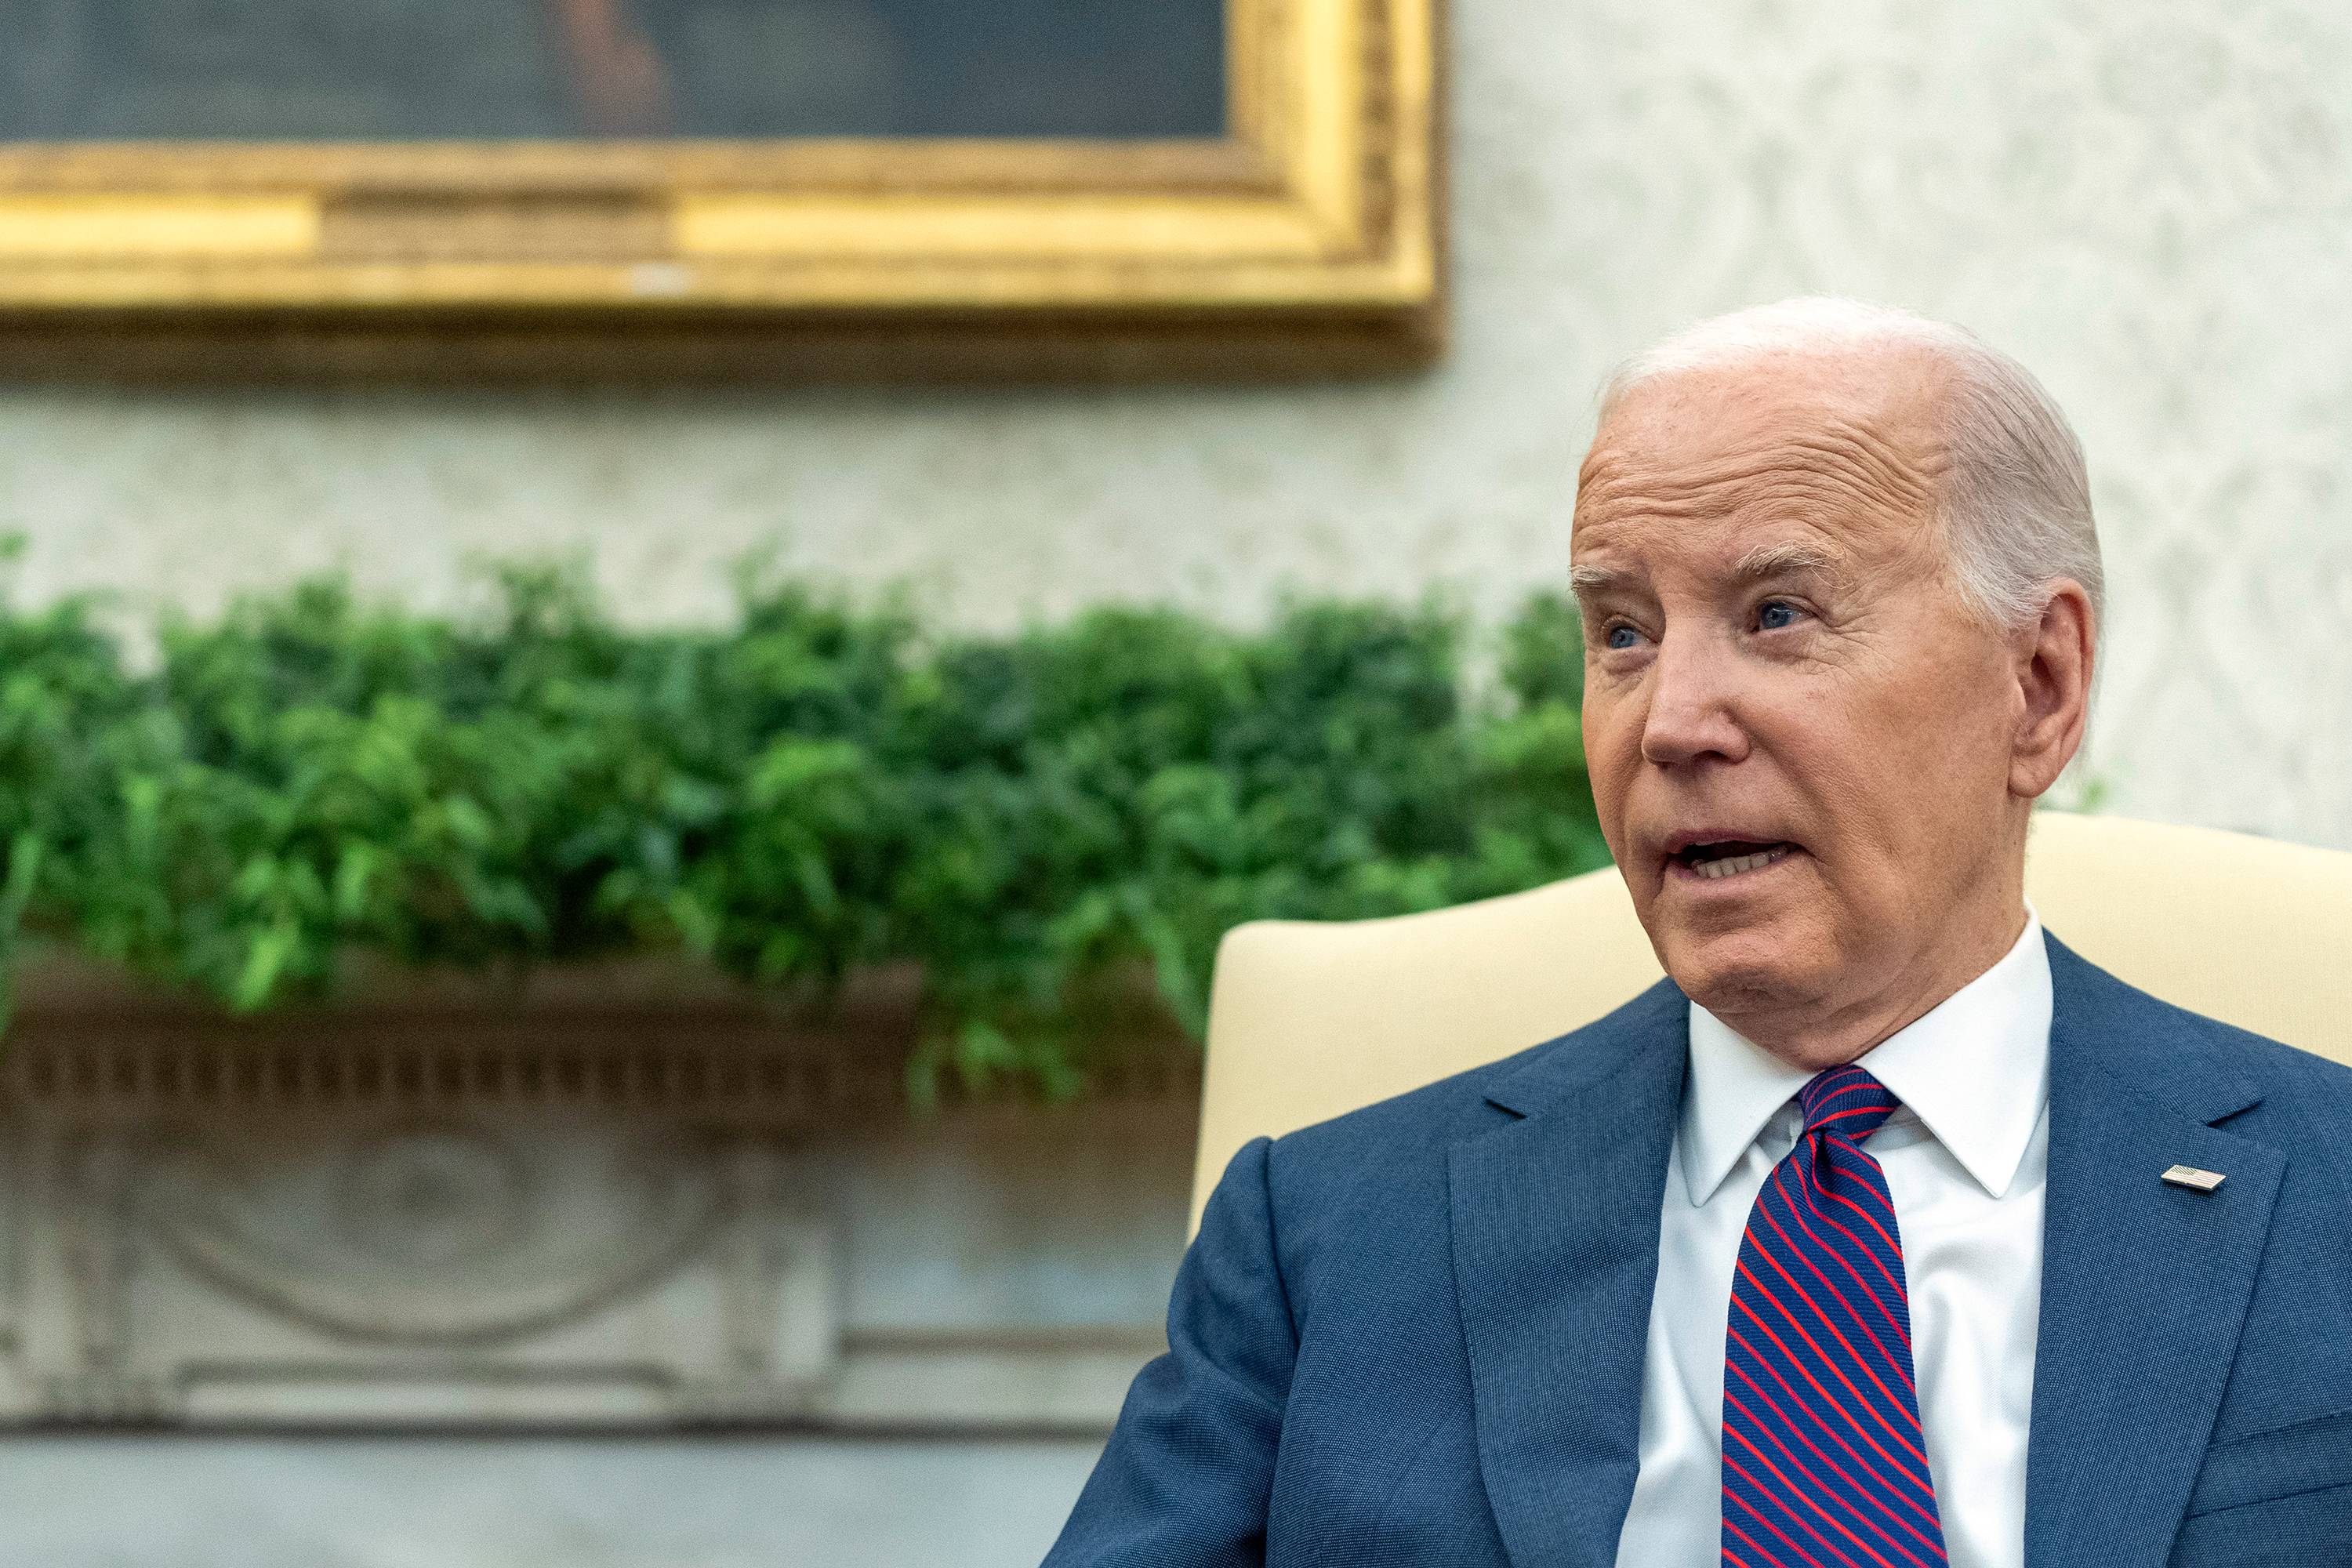 President Joe Biden speaks as he meets with Iraq's Prime Minister Mohammed Shia al-Sudani in the Oval Office on Monday.